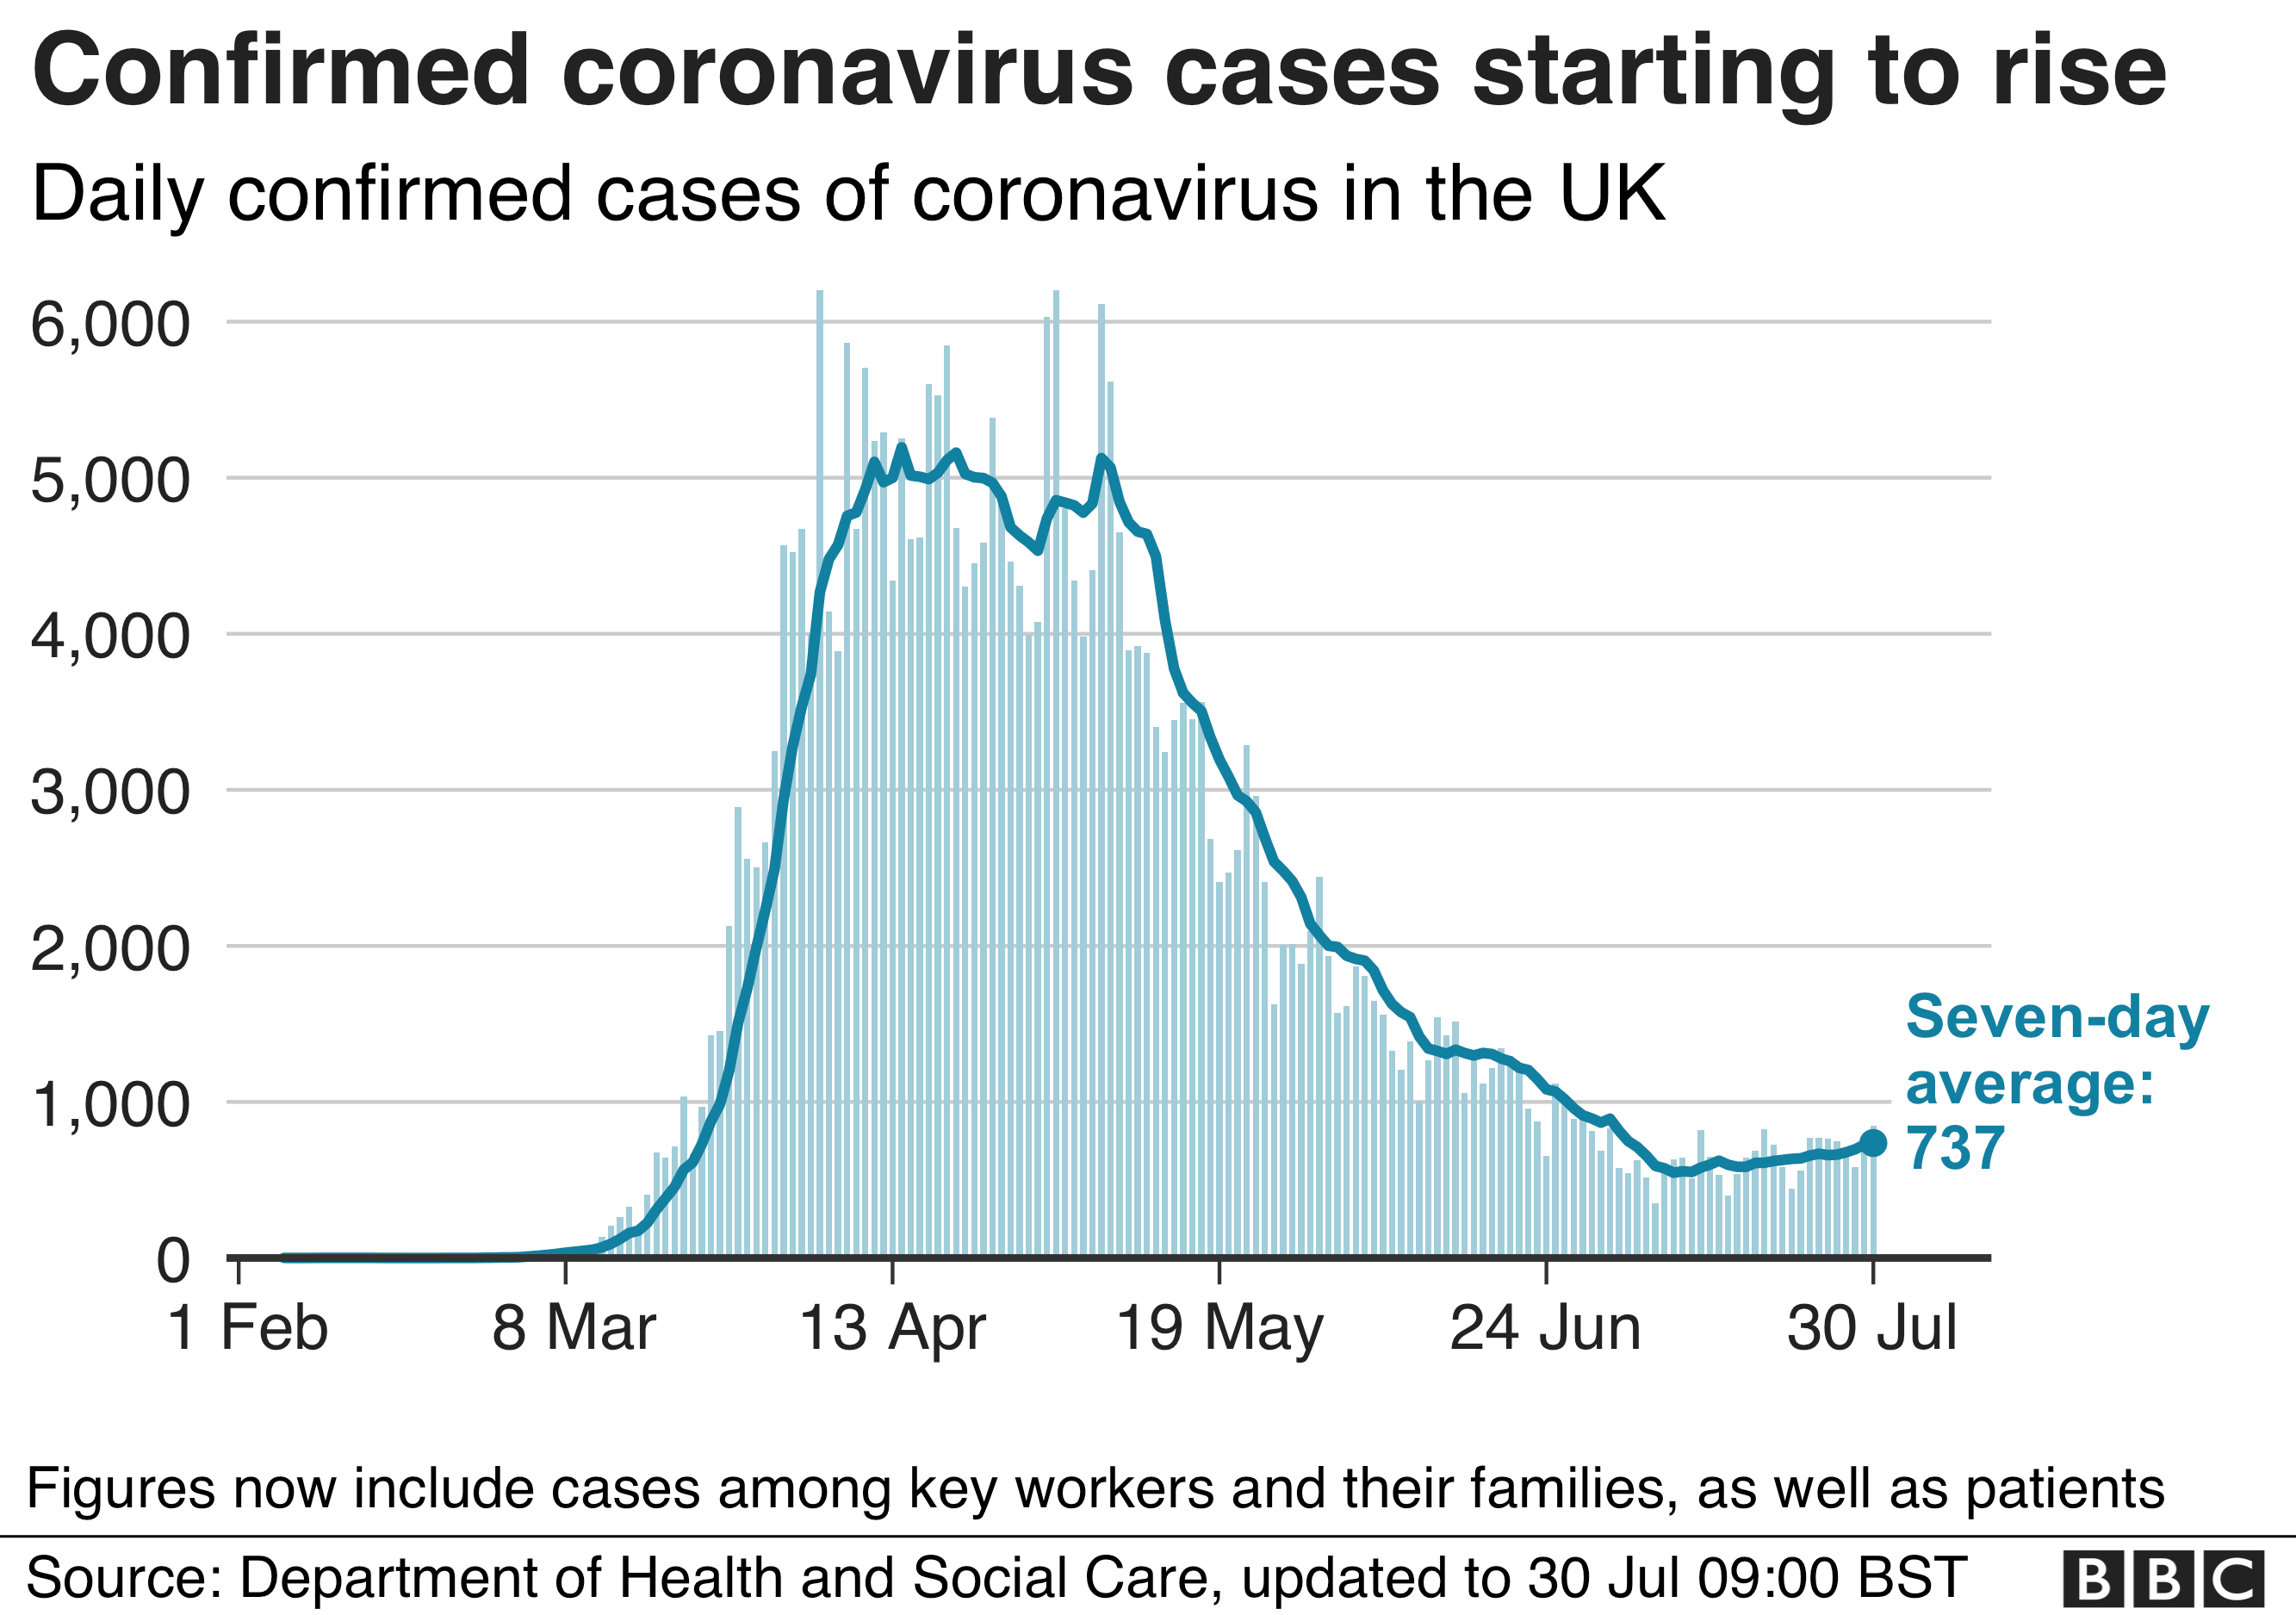 Chart showing number of cases in the UK starting to rise